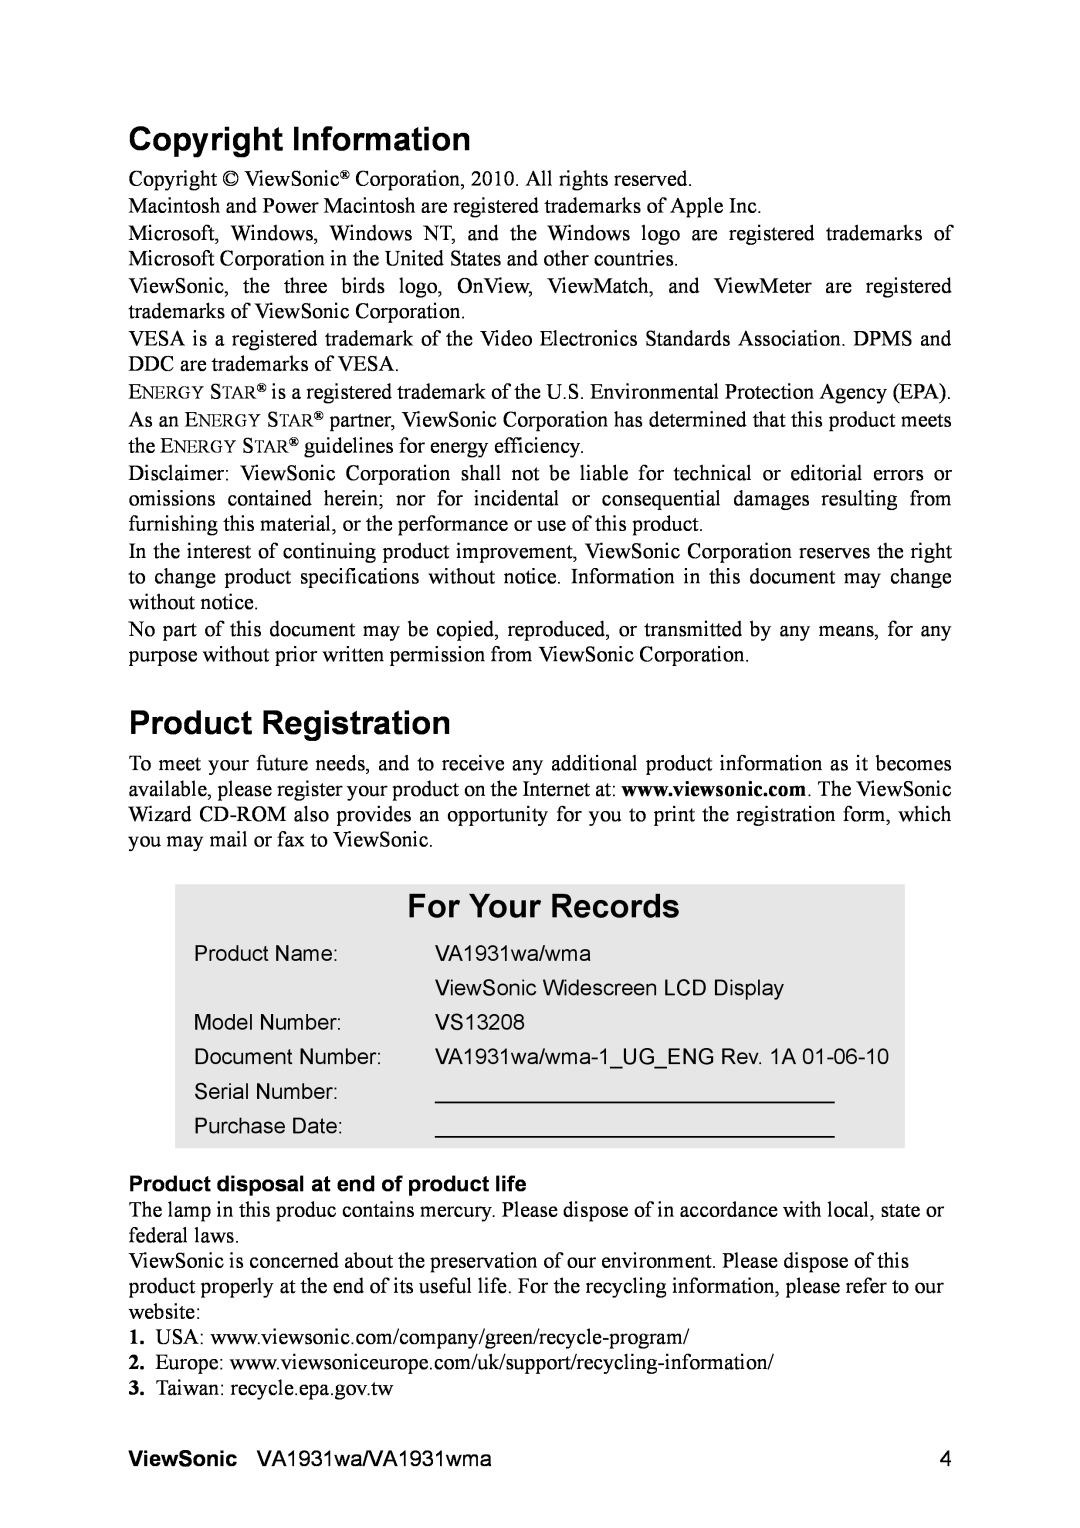 ViewSonic VS13208 Copyright Information, Product Registration, For Your Records, Product disposal at end of product life 